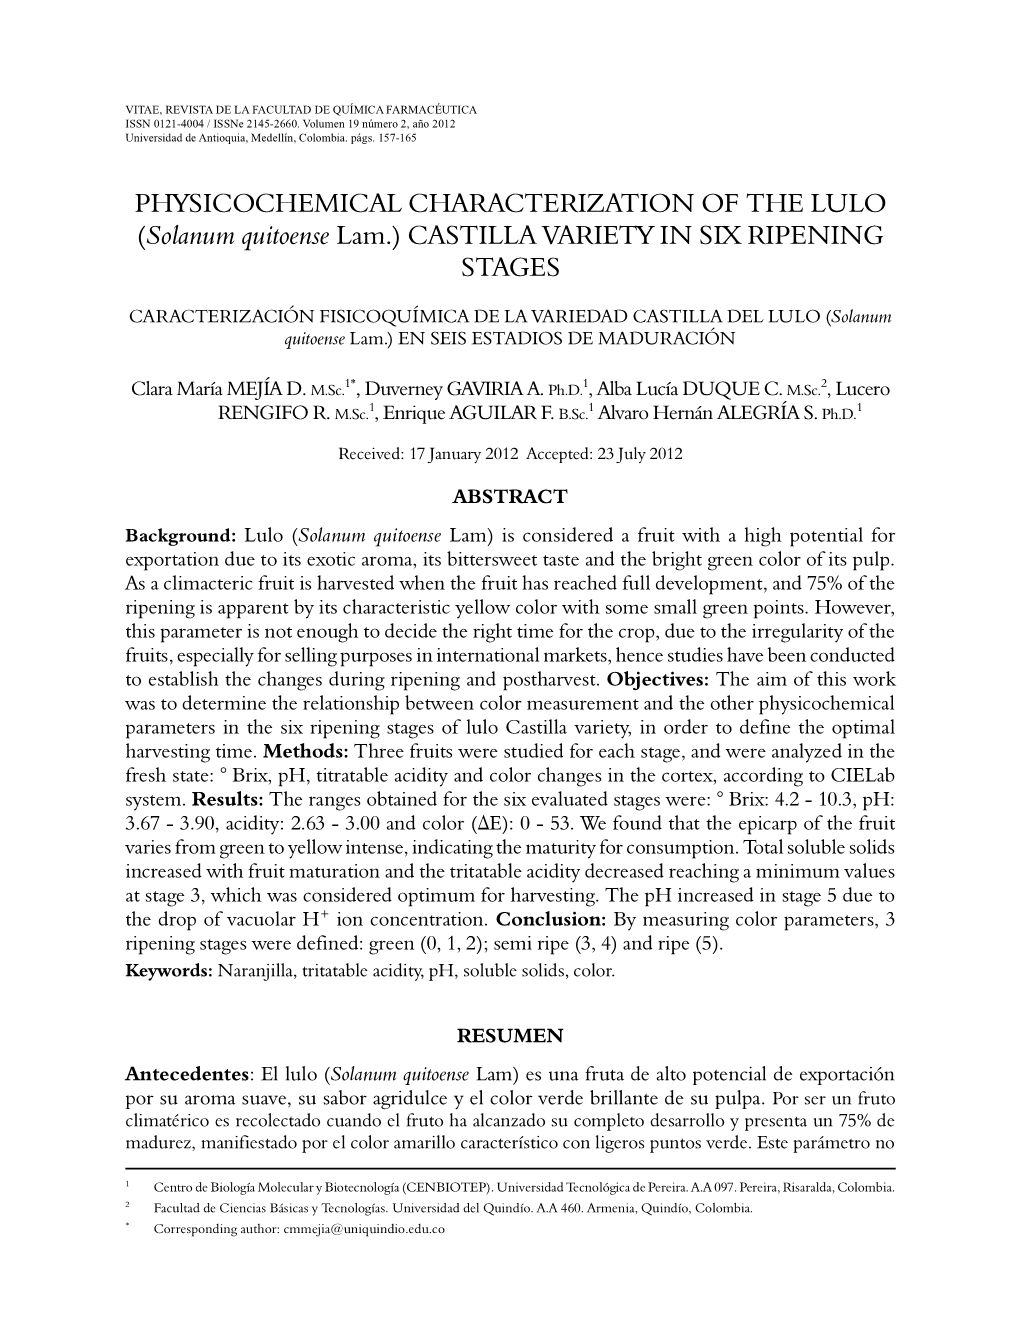 PHYSICOCHEMICAL CHARACTERIZATION of the LULO (Solanum Quitoense Lam.) CASTILLA VARIETY in SIX RIPENING STAGES